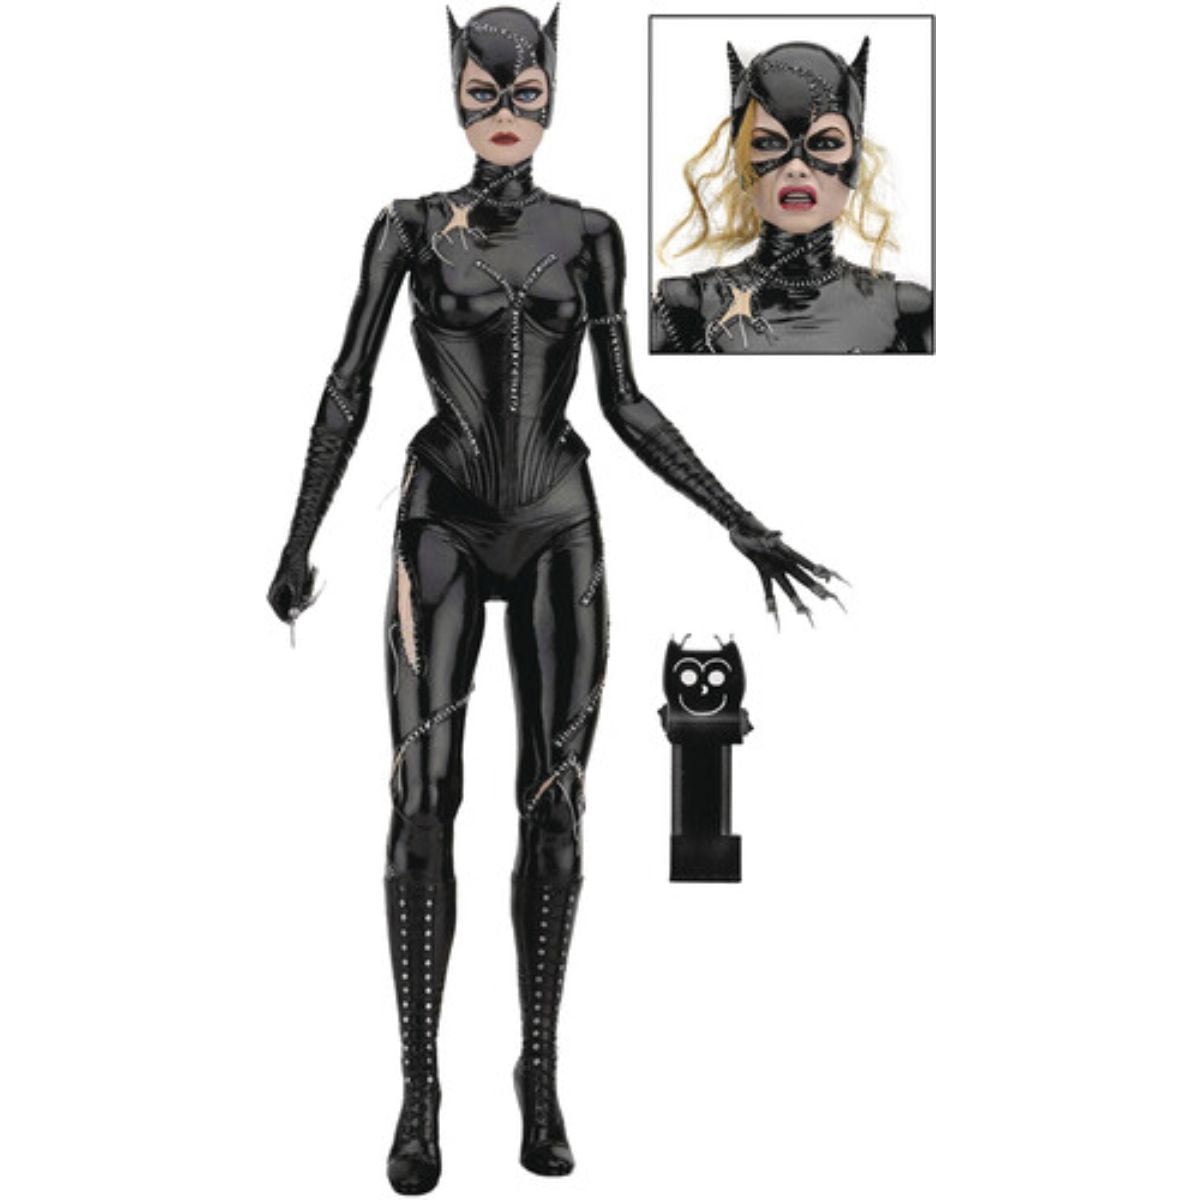 CATWOMAN 6 x 4 inches PRIVATE PRINTING PICTURE